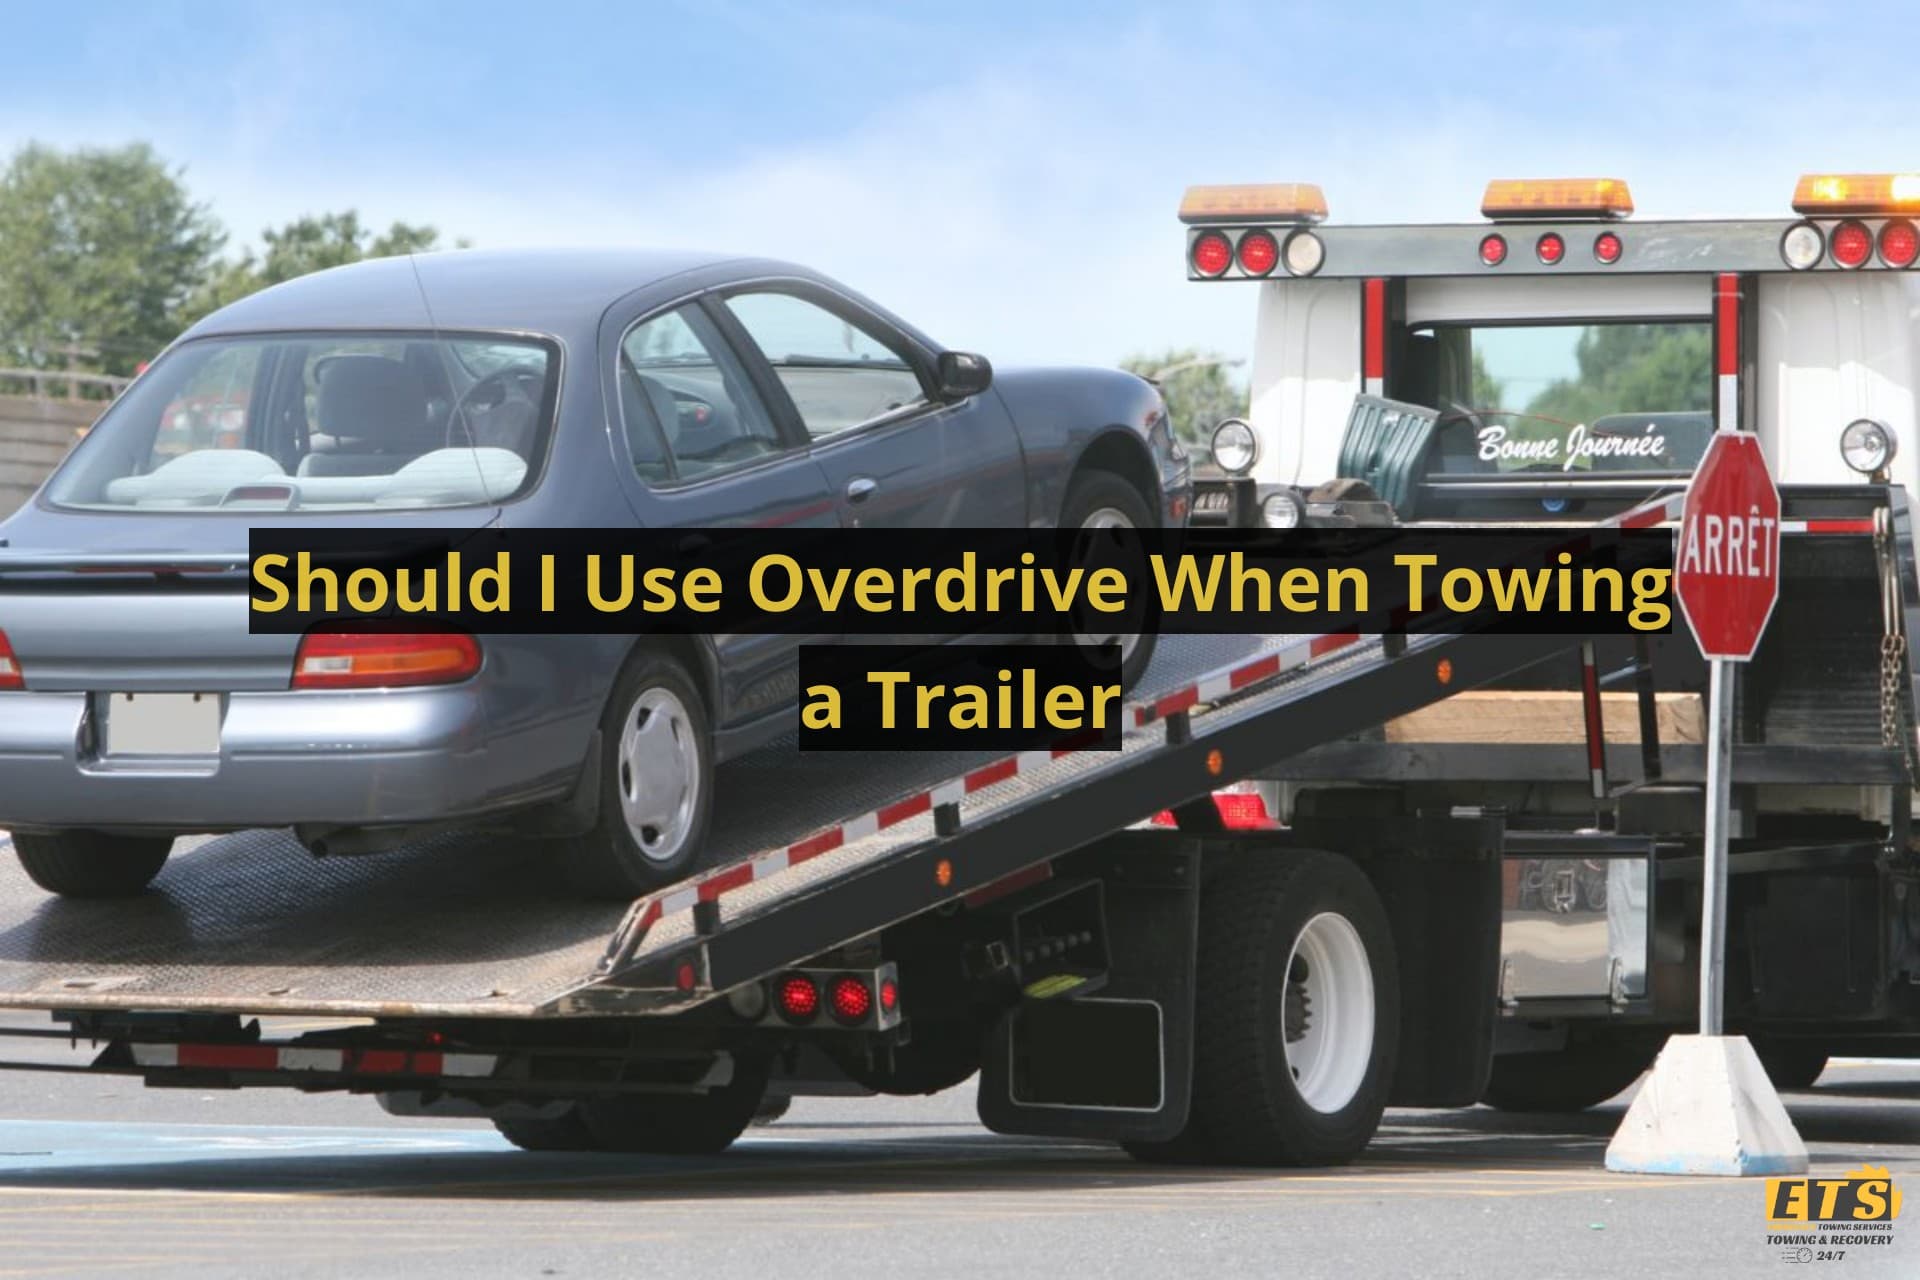 Should I Use Overdrive When Towing a Trailer